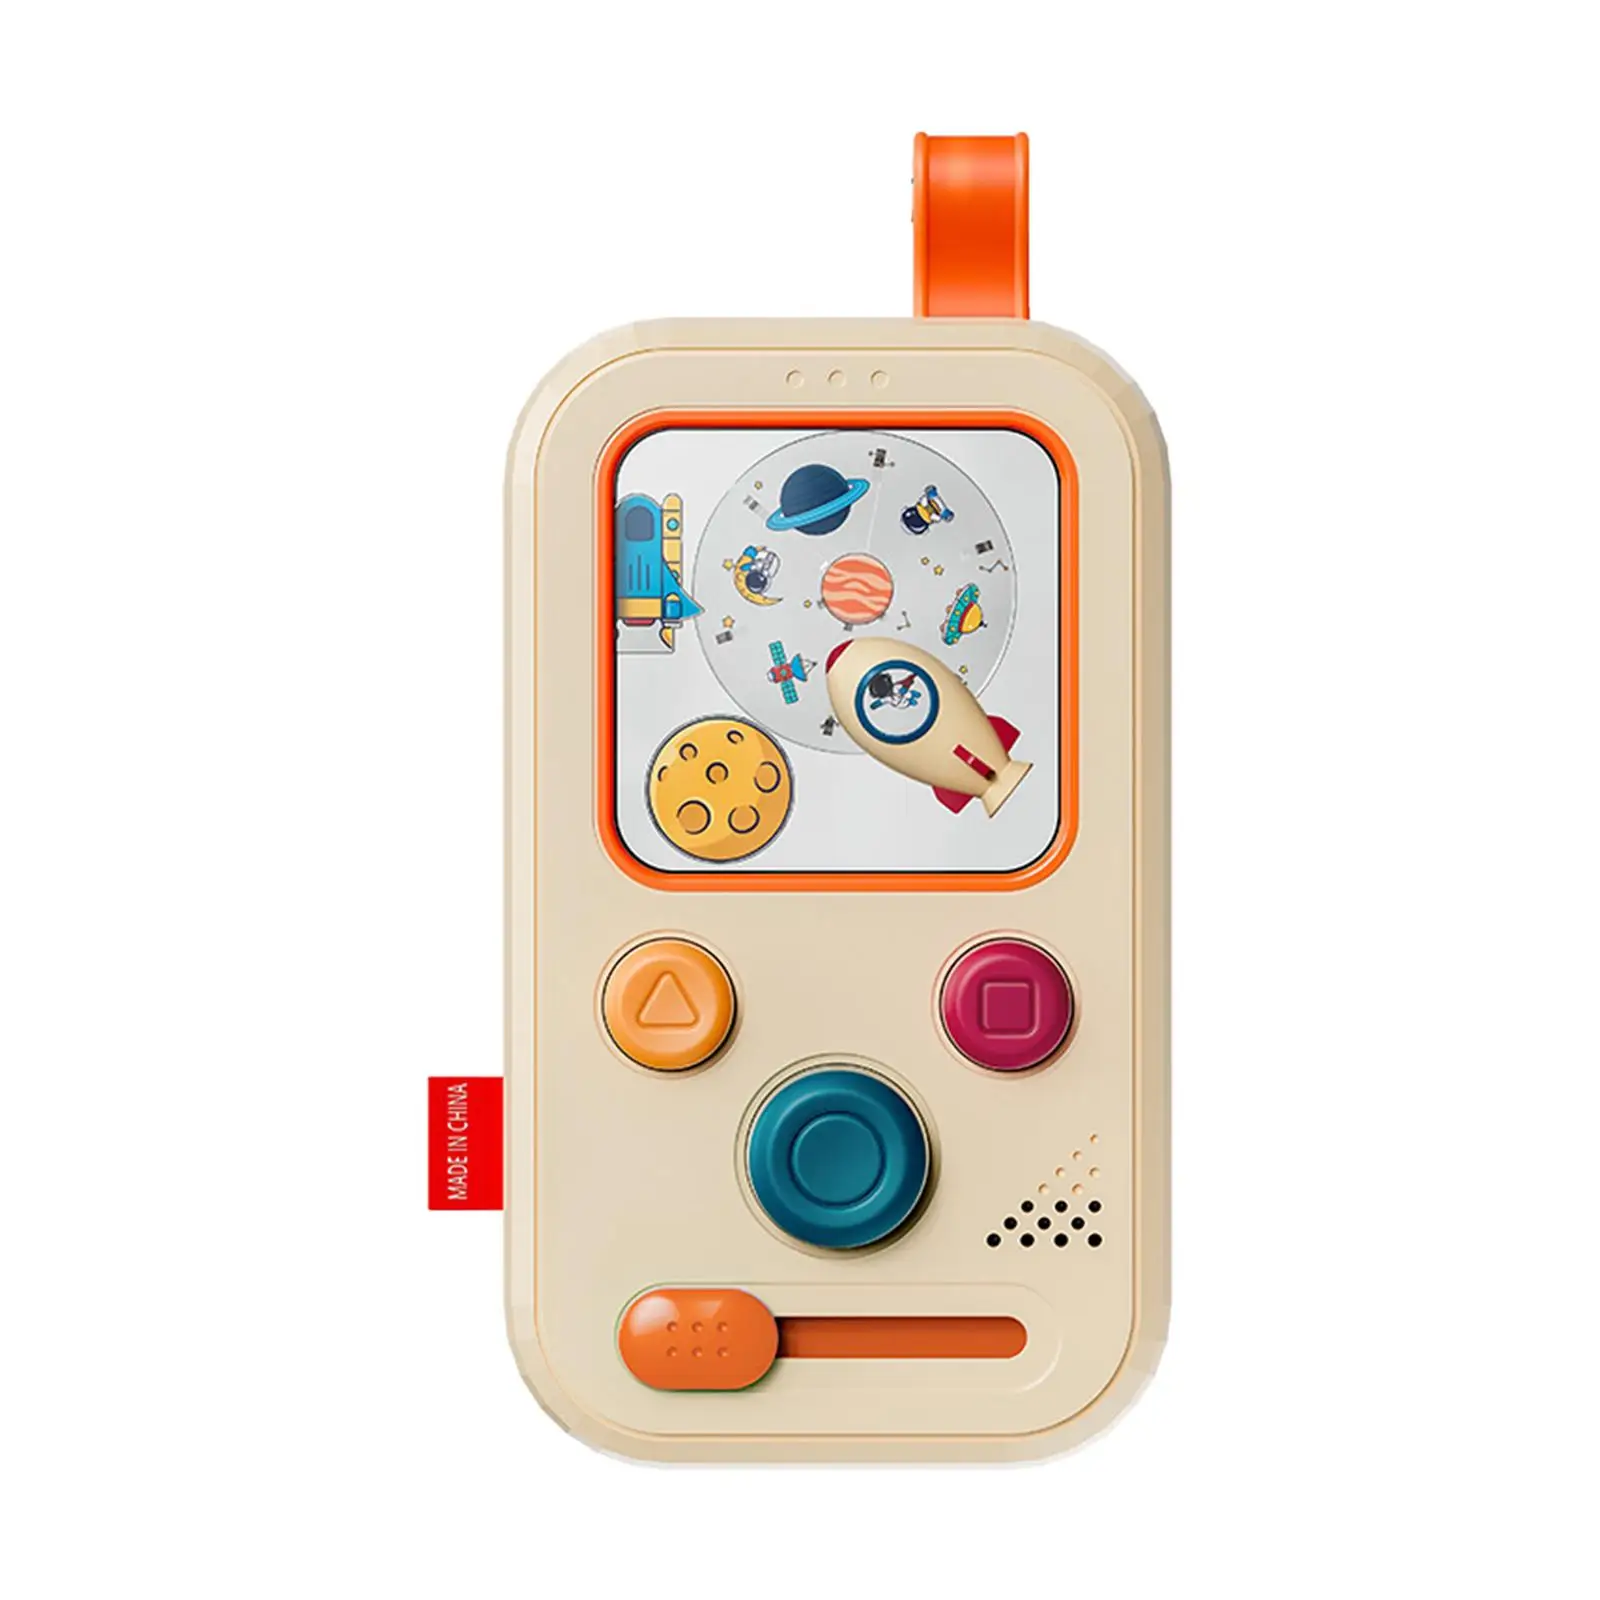 Space Theme Water Toy Compact Early Education Pastime Game Fun Portable Creative Sensory Toy for Gift Car Party Favor Girls